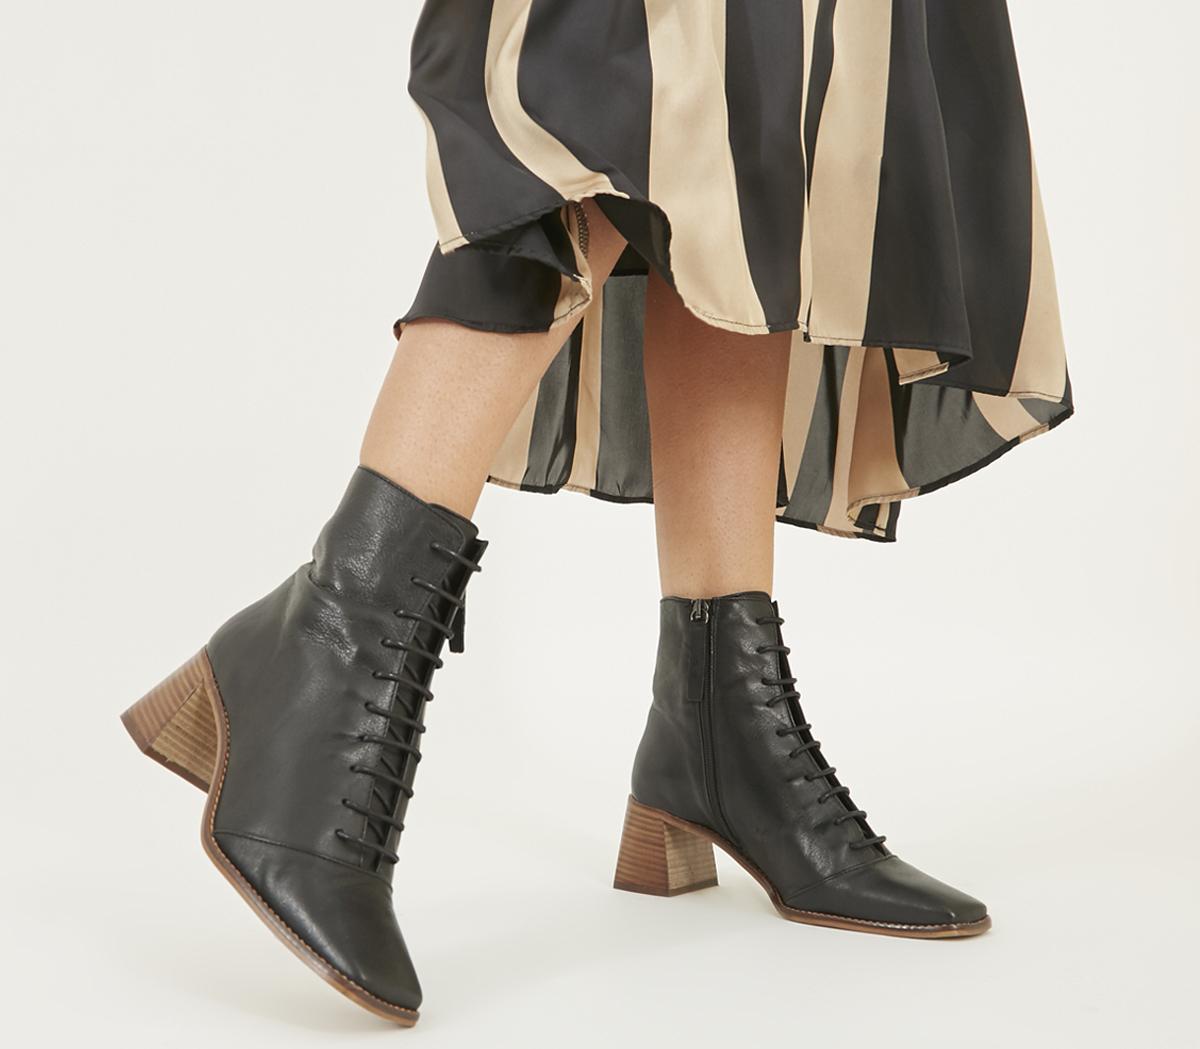 OFFICEAriella Lace Up BootsBlack Leather With Light Stack Heel